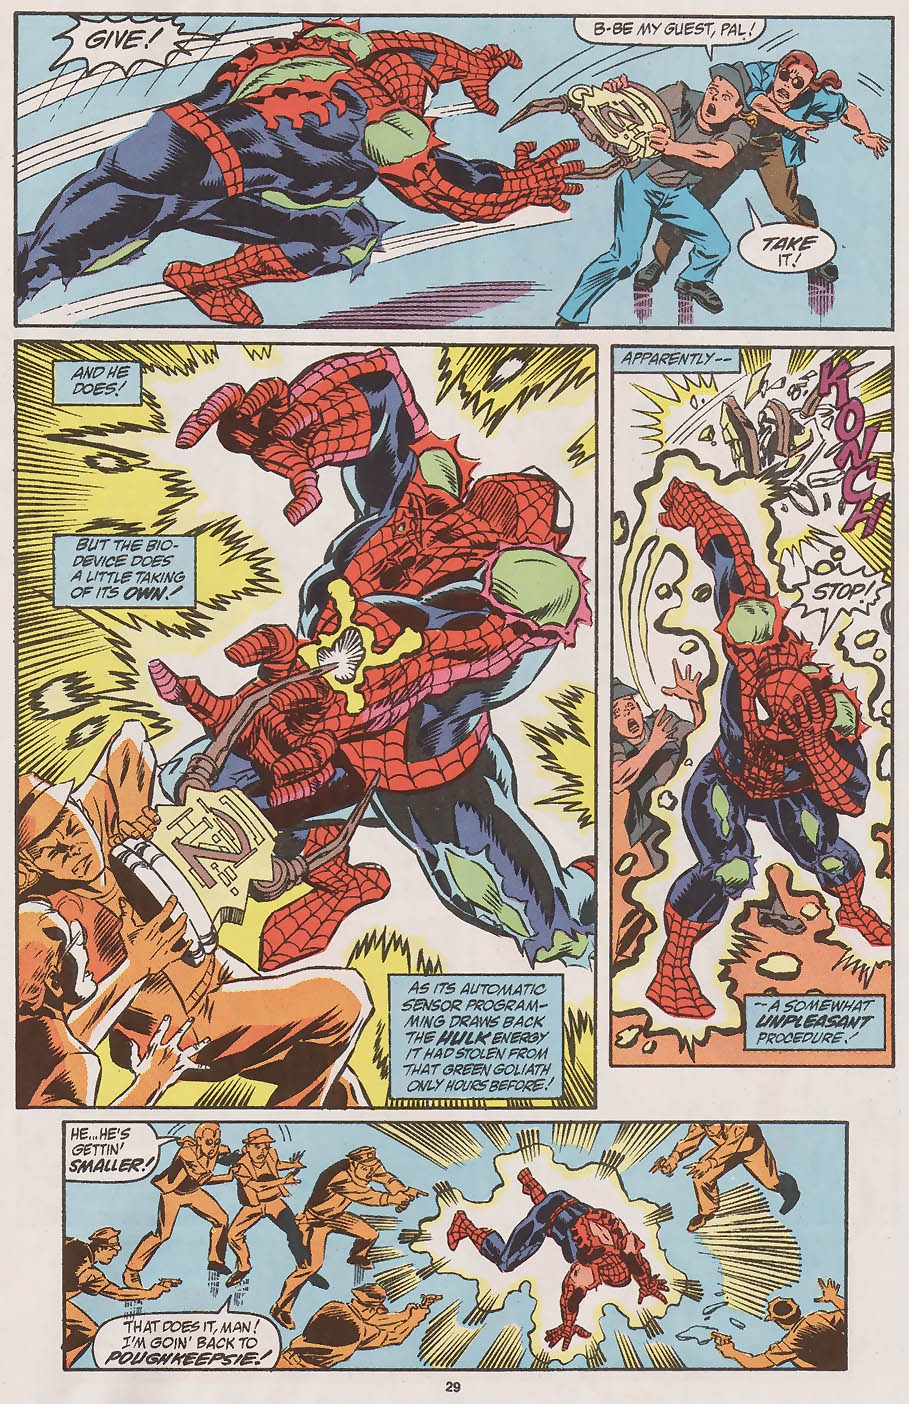 Web of Spider-Man #70 pg 21 by Saviuk, 1990 -- Spider-Hulk zapped by the  Biokinetic Energy Absorber and transformed!, in Paul P's SPIDER-MAN (Alex  Saviuk) Comic Art Gallery Room